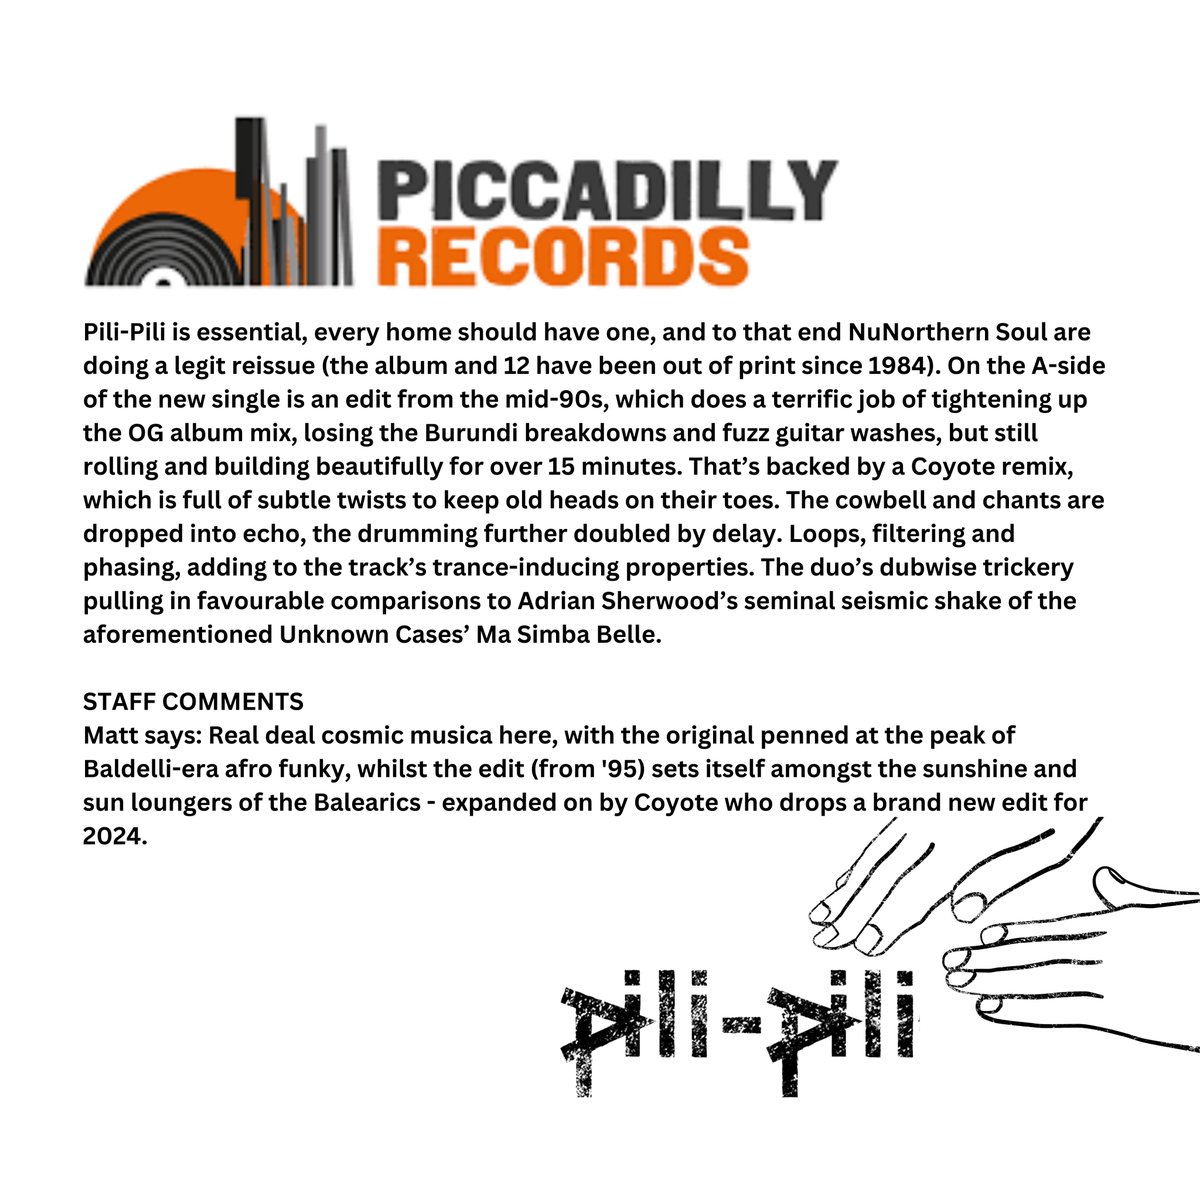 OUT TODAY - Jasper Van't Hof - Pili Pili. Thanks to @PiccadillyRecs for the words. If you are in Manchester, pop in and grab your copy.
piccadillyrecords.com/155417/Jasper-…
#vinylrecords #vinylcommunity #Manchester